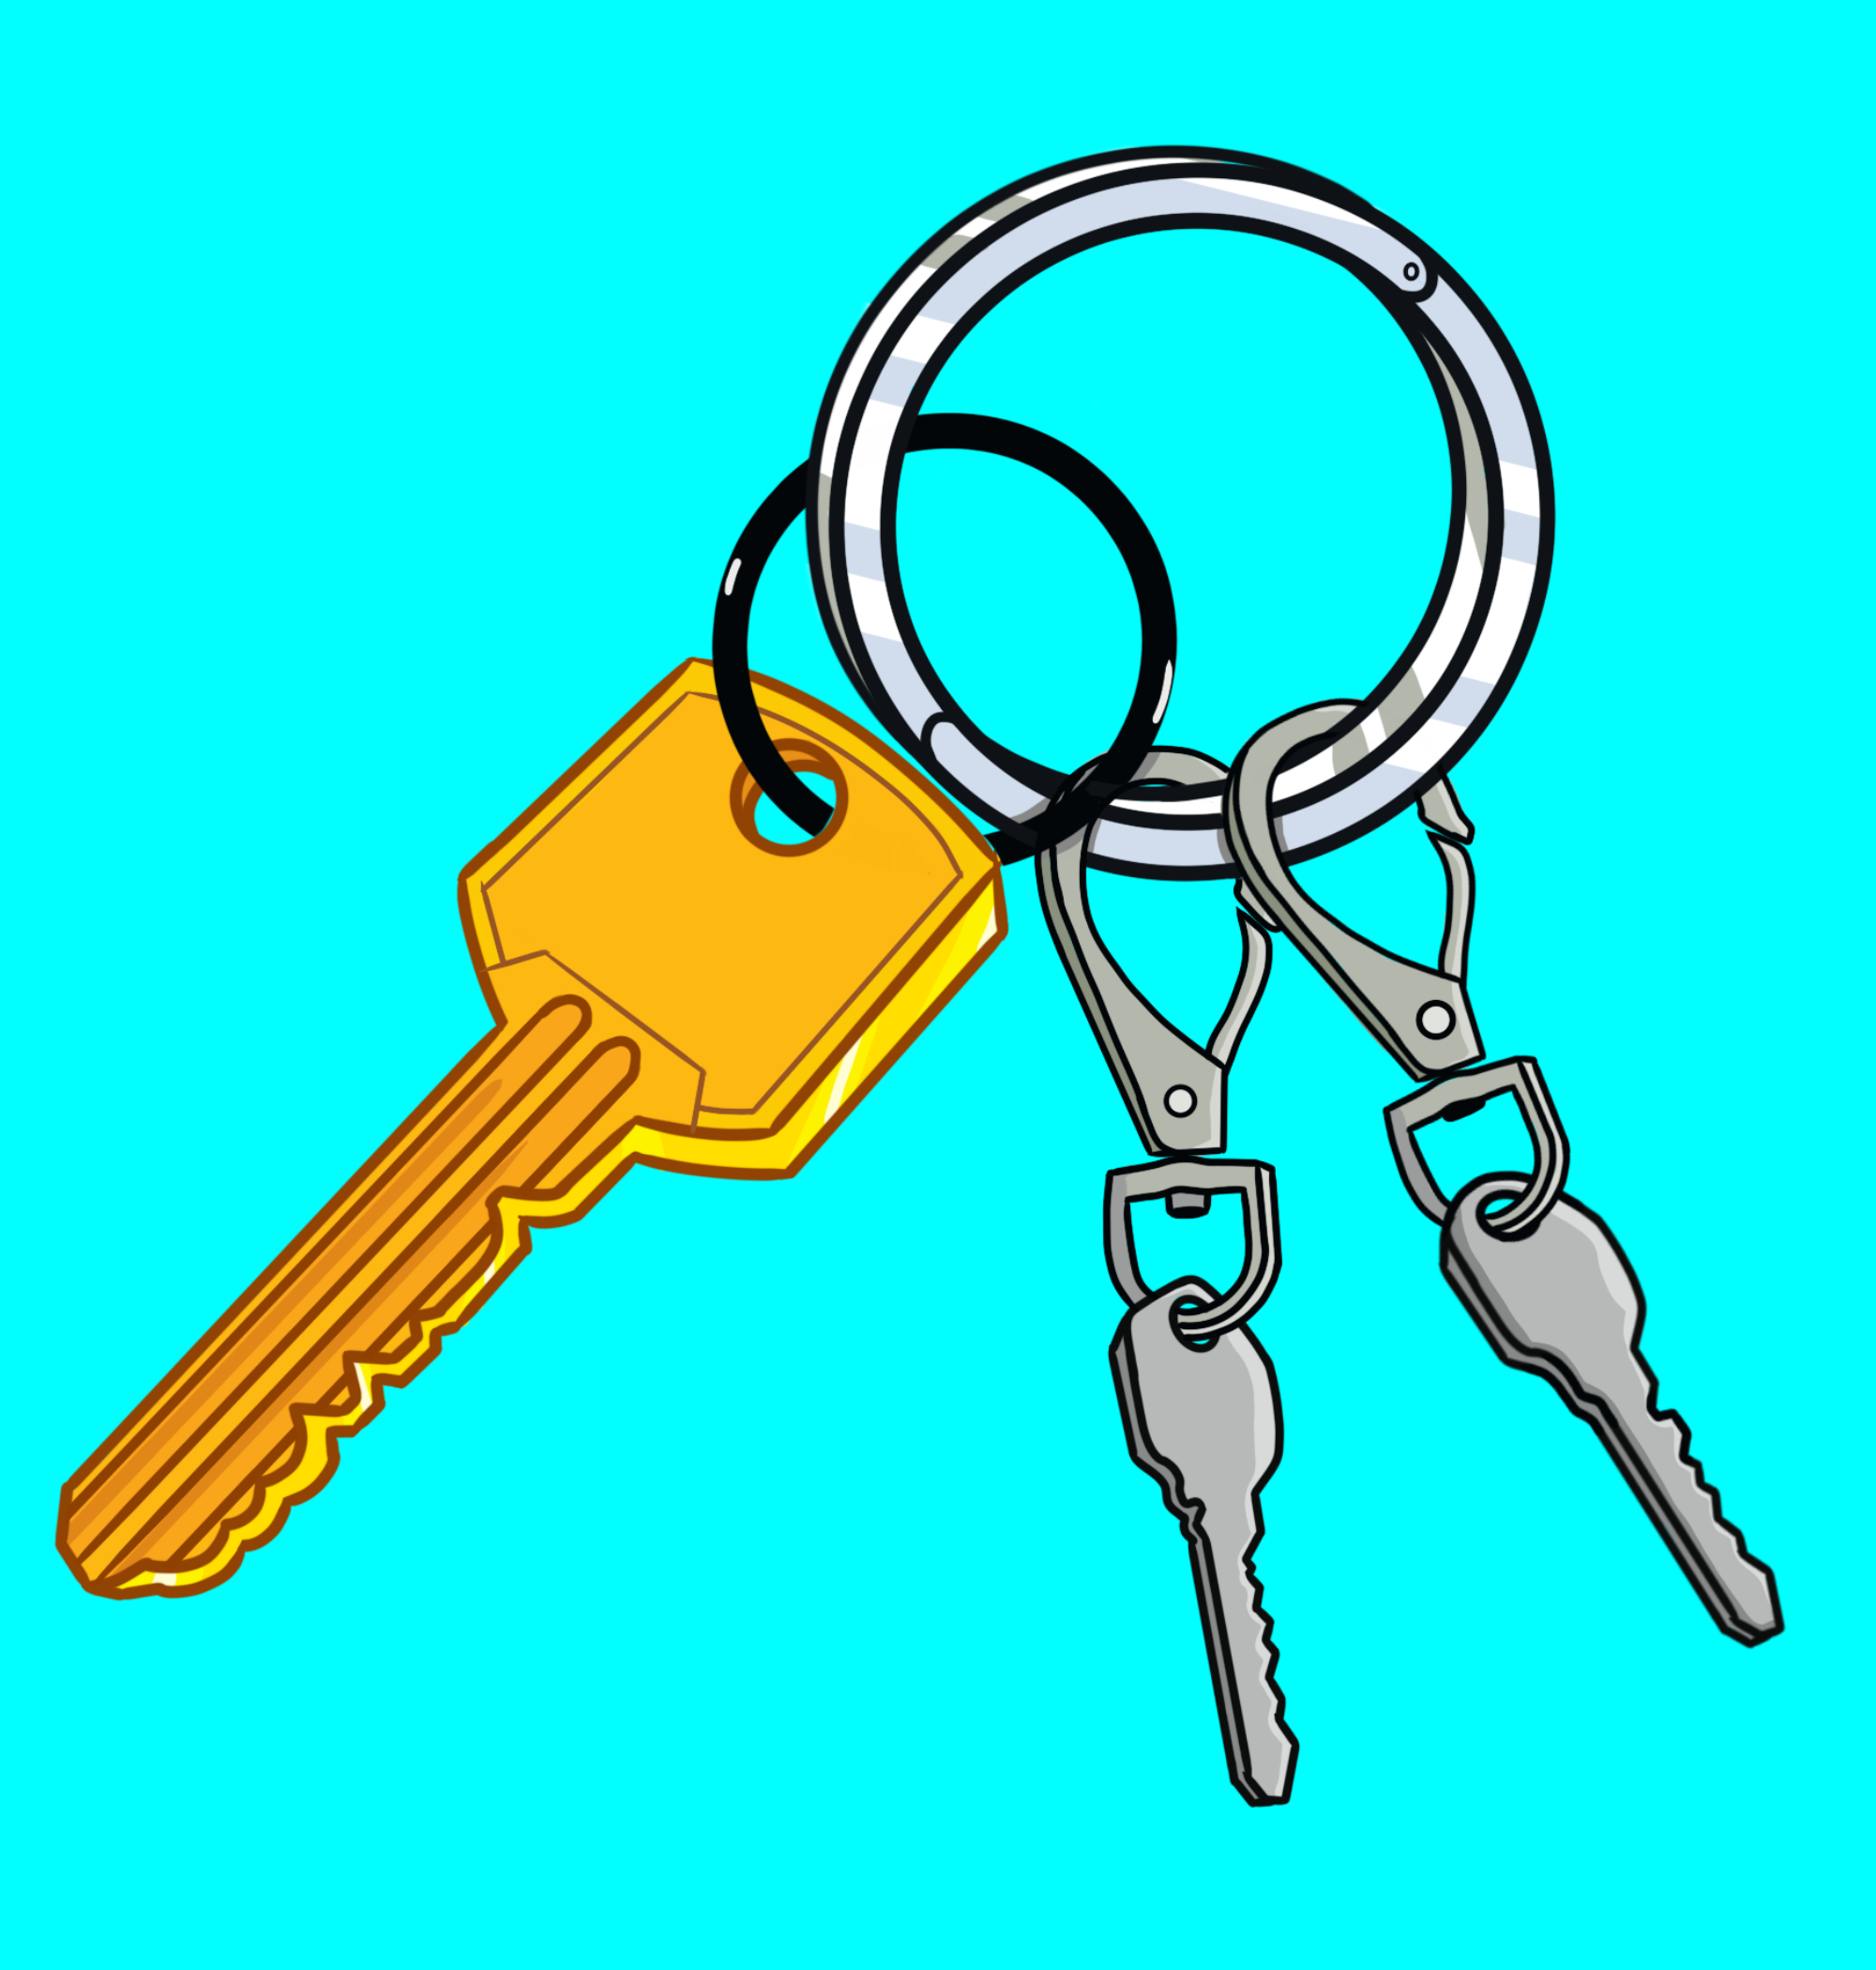 A keychain with three keys. A large, gold key represents the full-access keys on NEAR. The two other keys are gray and smaller, and have detachable latches on them. They represent function-call access key. Art created by alcantara_gabriel.near